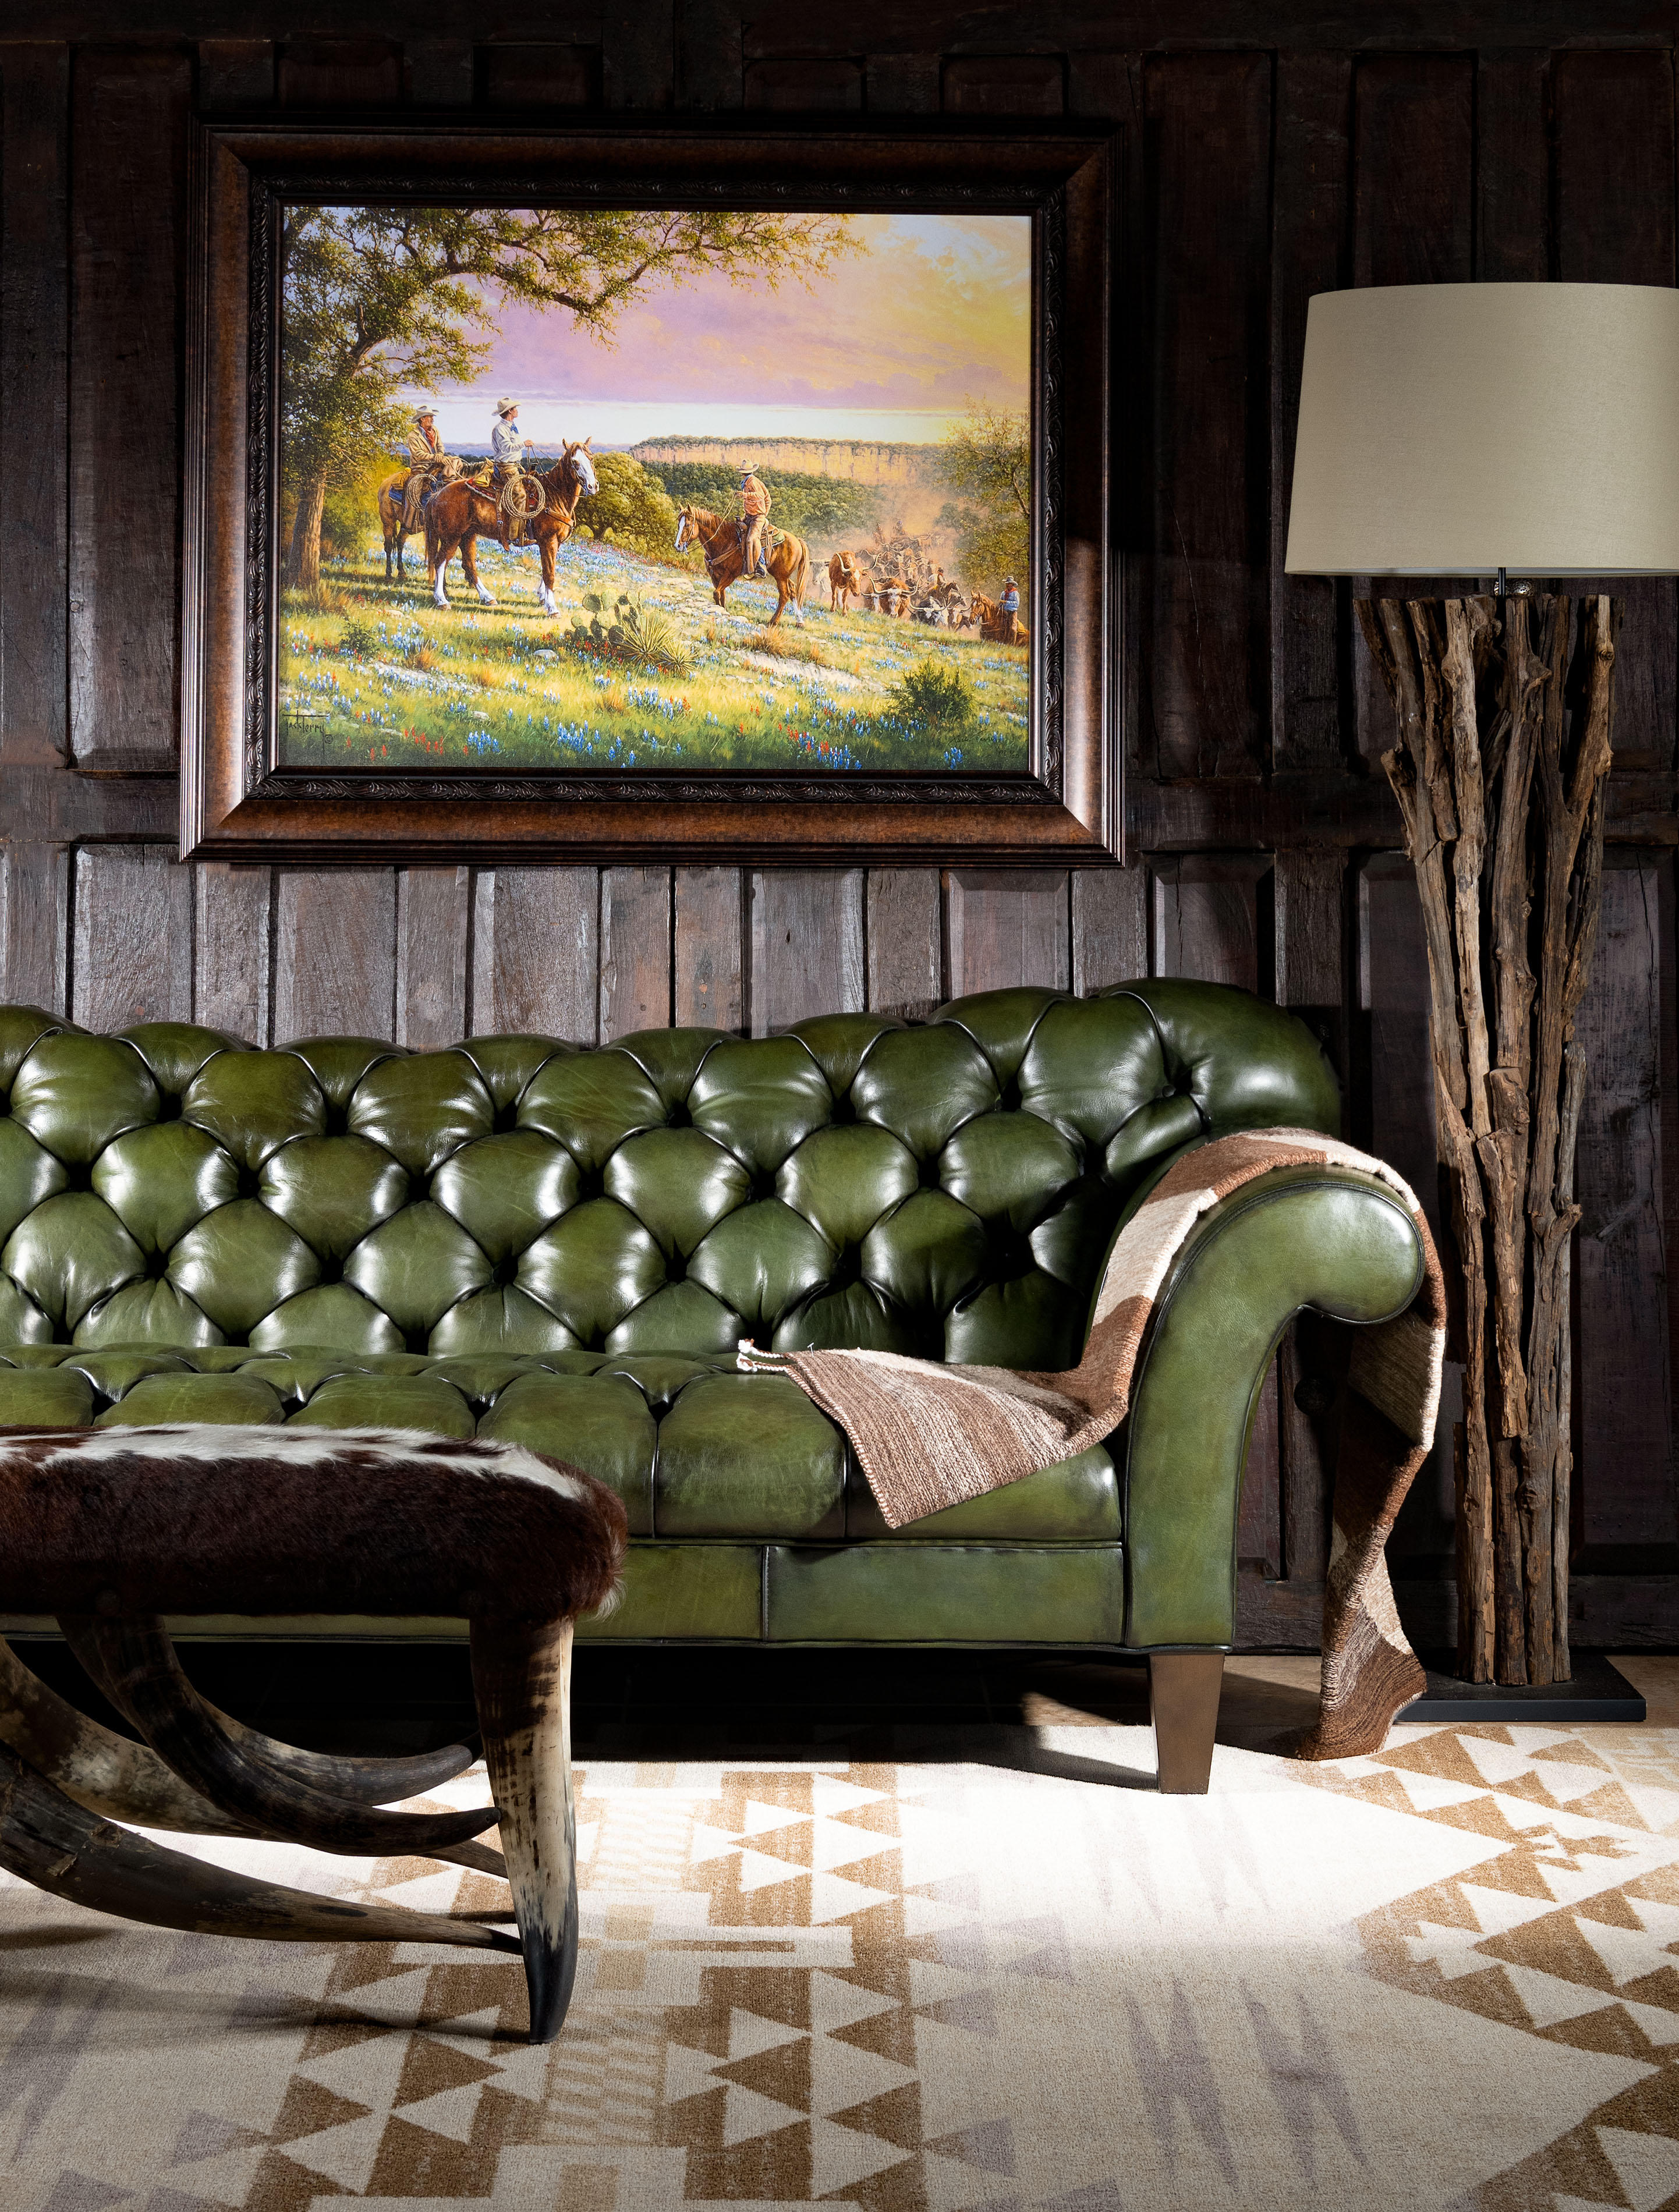 Our Daphne Leather Chesterfield Sofa is a classy, timeless piece of furniture that dominates deÌcor and conversations. This hand-tufted couch is every bit as fashionable as it is glamorous! The Daphne Chesterfield Sofa features an elegantly curving design that echoes some of the finest natural patterns. Rich, natural and beautiful olive green leather makes this couch the perfect addition to any home pursuing an upscale Western aesthetic. The Daphne Chesterfield Sofa is a prime example of the quality possible with hand-crafted furniture. Our signature hand antiqued leather gives this unique high-end sofa a patina of timeless elegance. Because of its distinctive shape and versatile finishing material, the Daphne Chesterfield Sofa is a welcome addition to virtually any sitting room or living room. This beautiful piece of leather furniture pairs well with almost any interpretation of the fine rustic aesthetic. It exudes luxury, yet can be paired with virtually any design aesthetic thanks to its simple, timeless design.